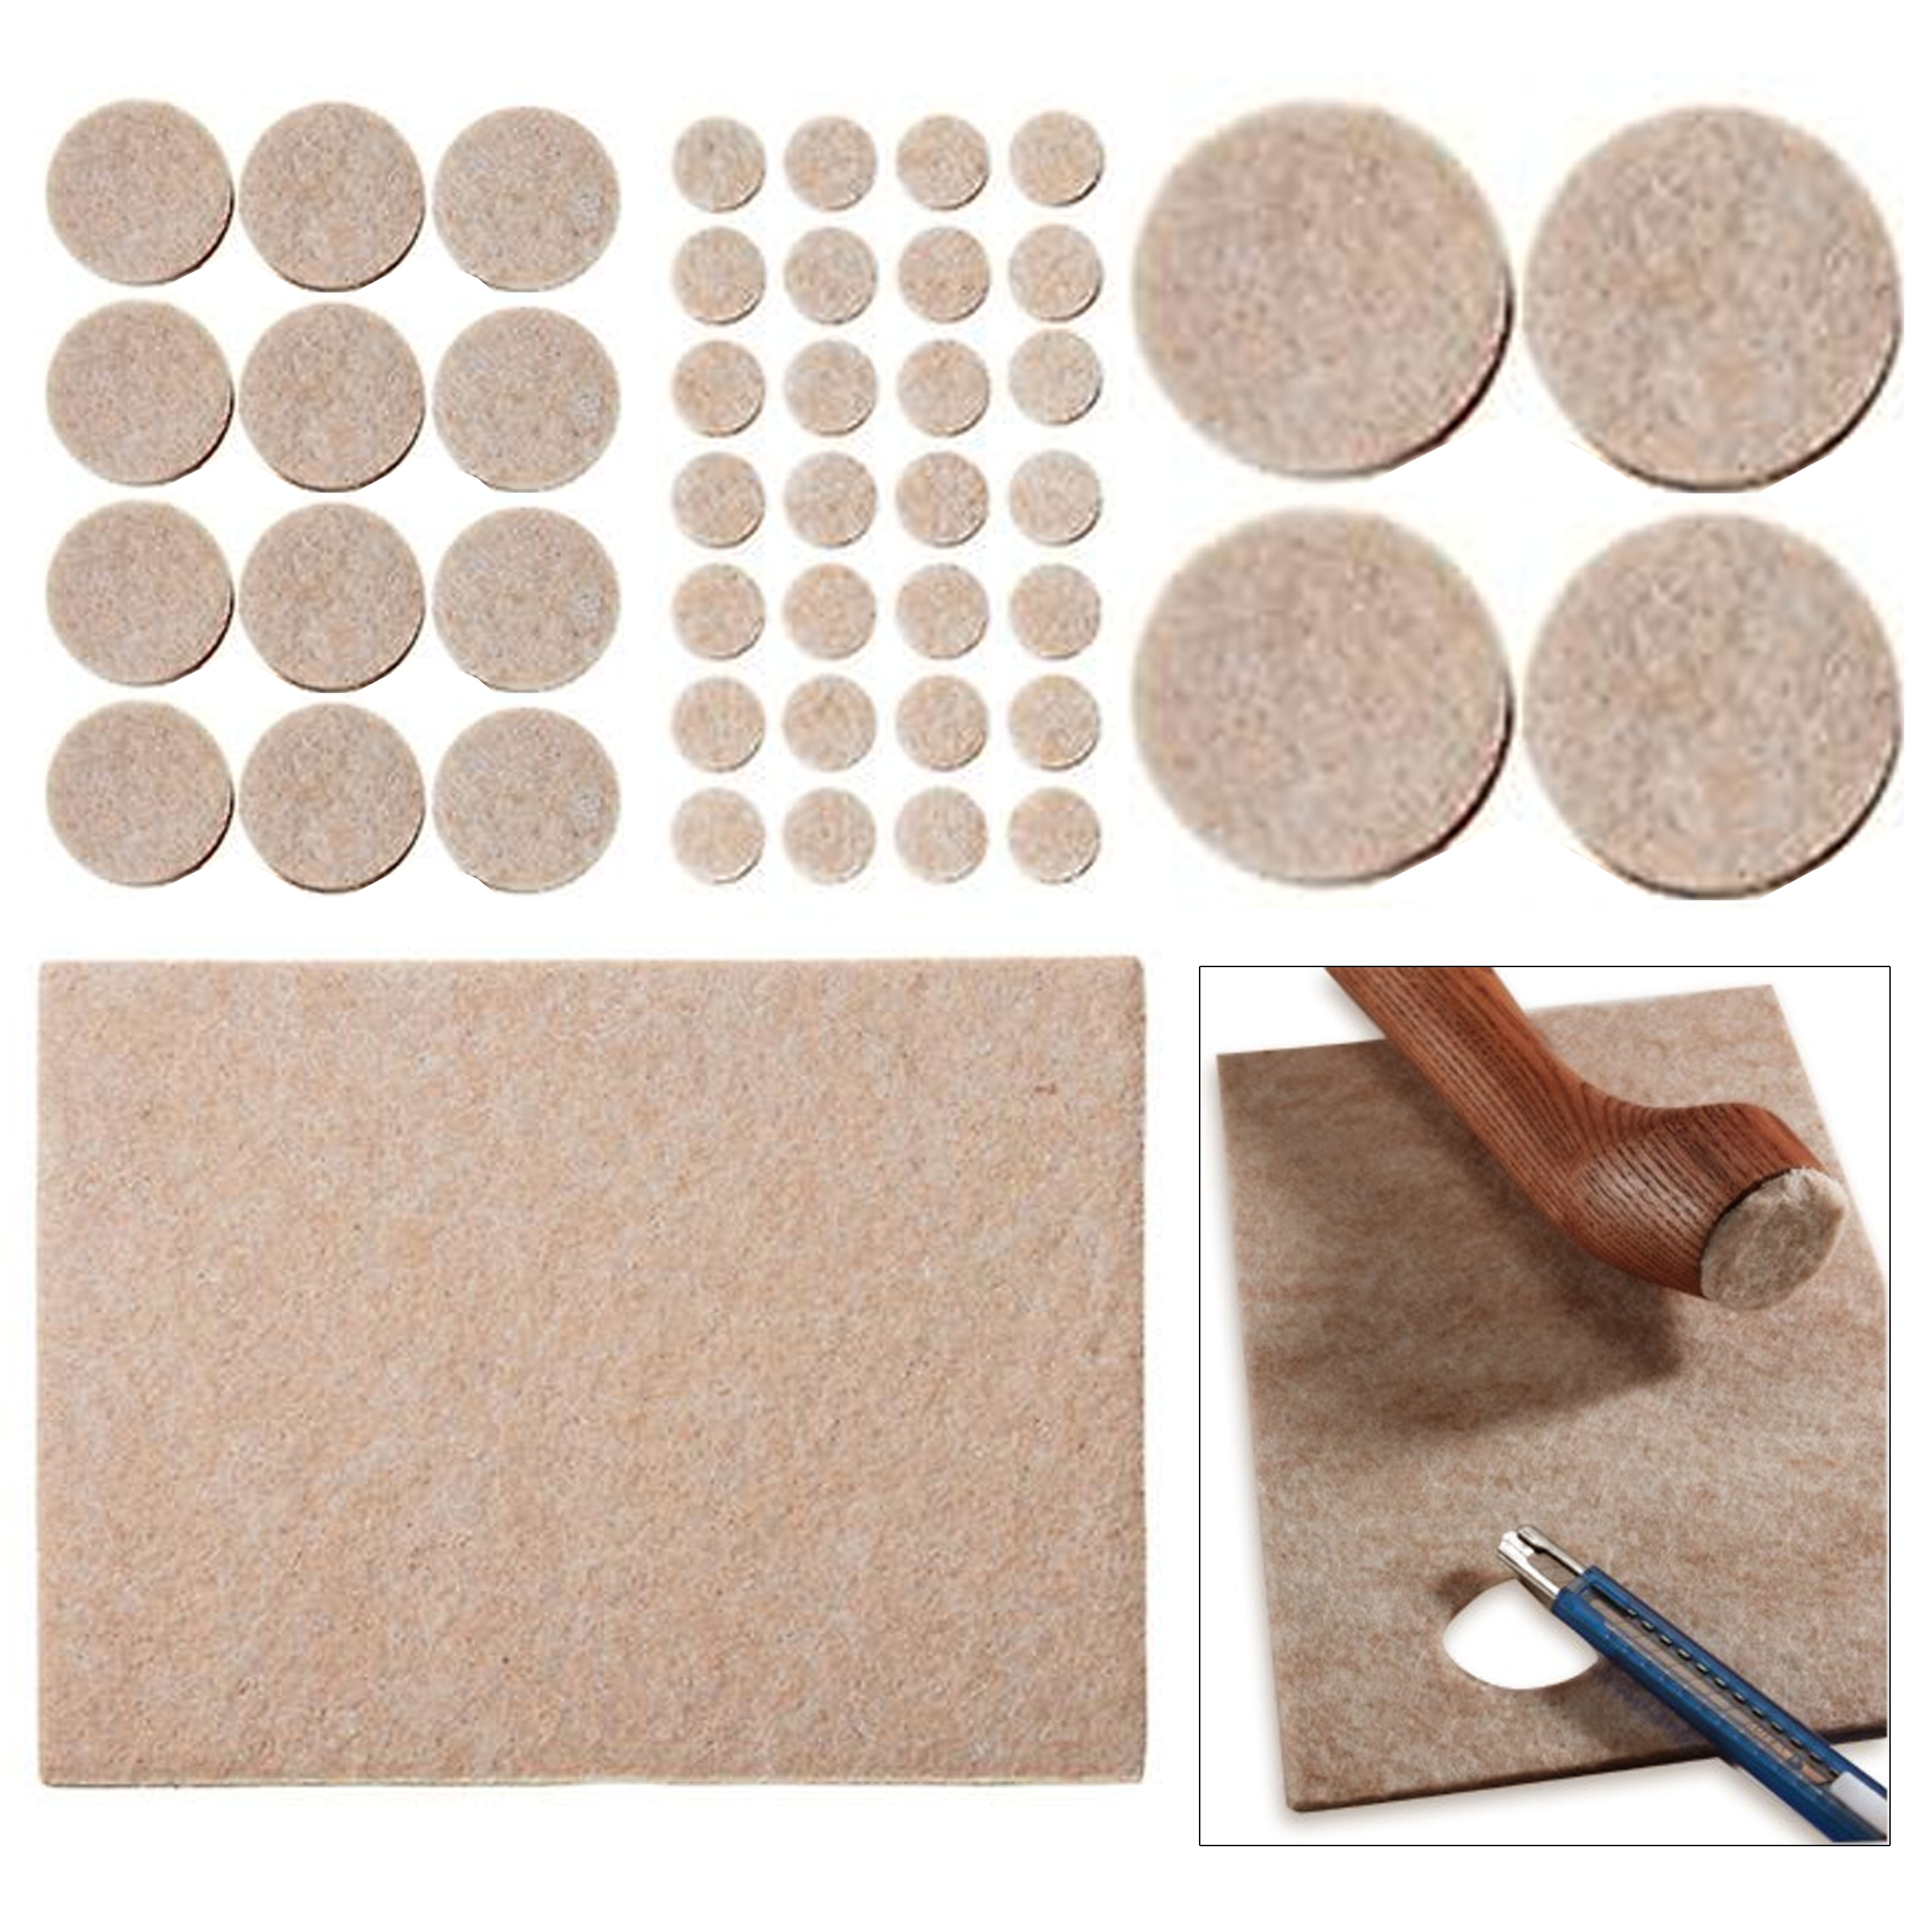 113 PCS VARIETY PACK Protect your floors and furnit NEW HEAVY DUTY FELT PADS 